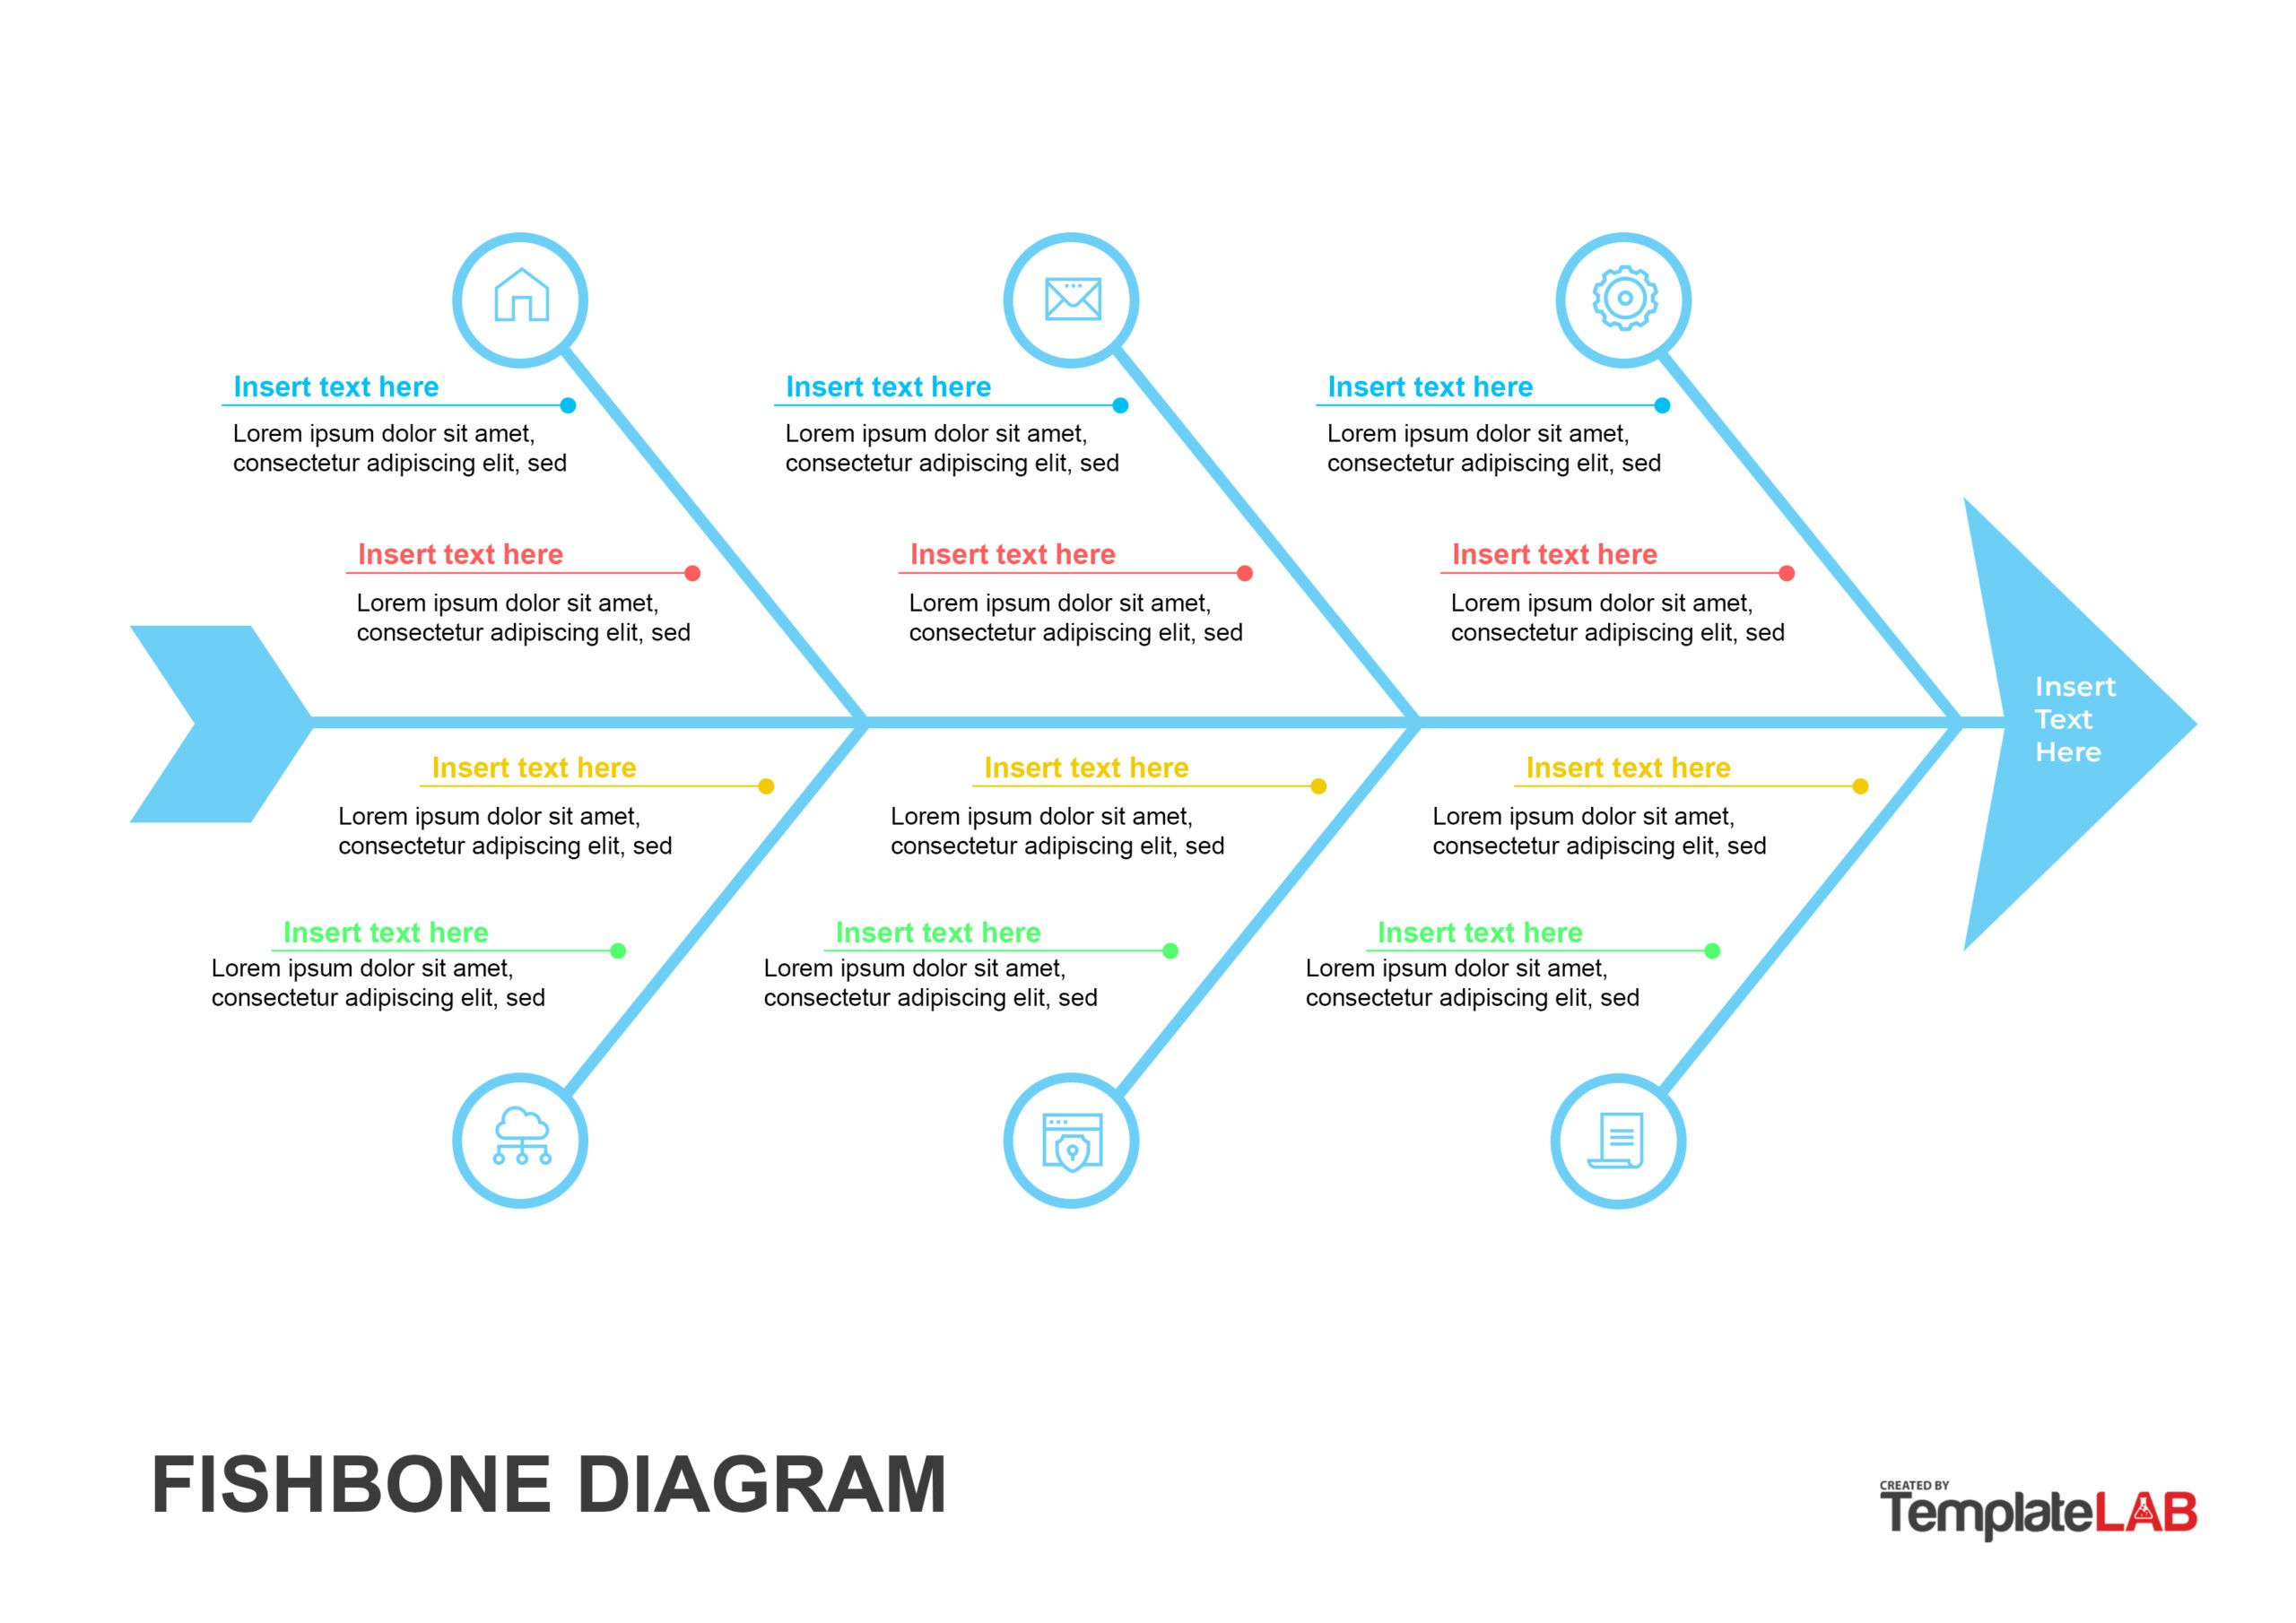 25 Great Fishbone Diagram Templates Examples Word Excel PPT 